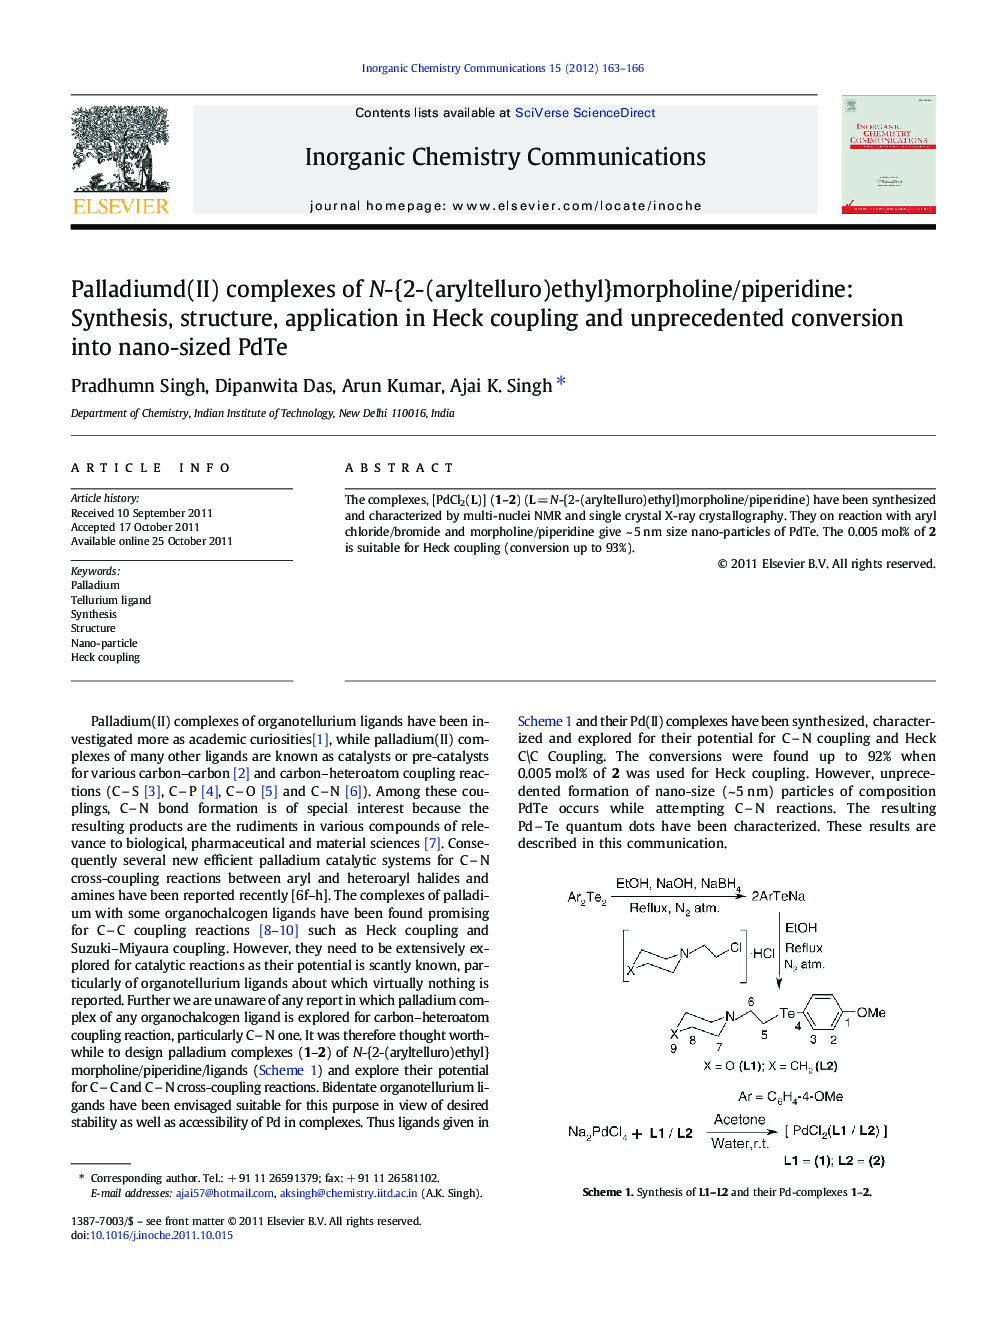 Palladiumd(II) complexes of N-{2-(aryltelluro)ethyl}morpholine/piperidine: Synthesis, structure, application in Heck coupling and unprecedented conversion into nano-sized PdTe